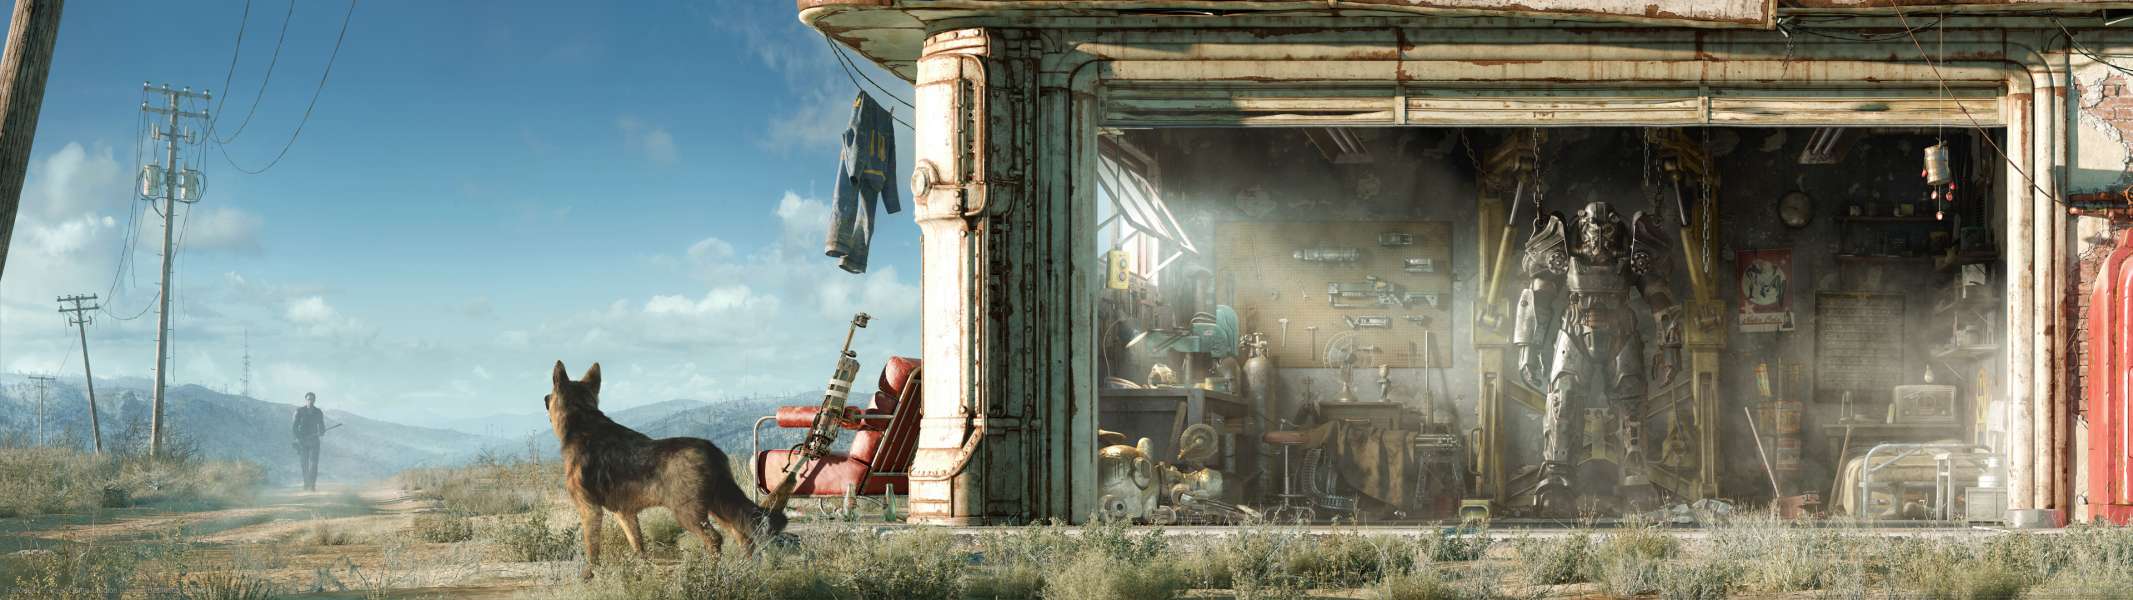 Fallout Dual Screen Wallpaper Or Background